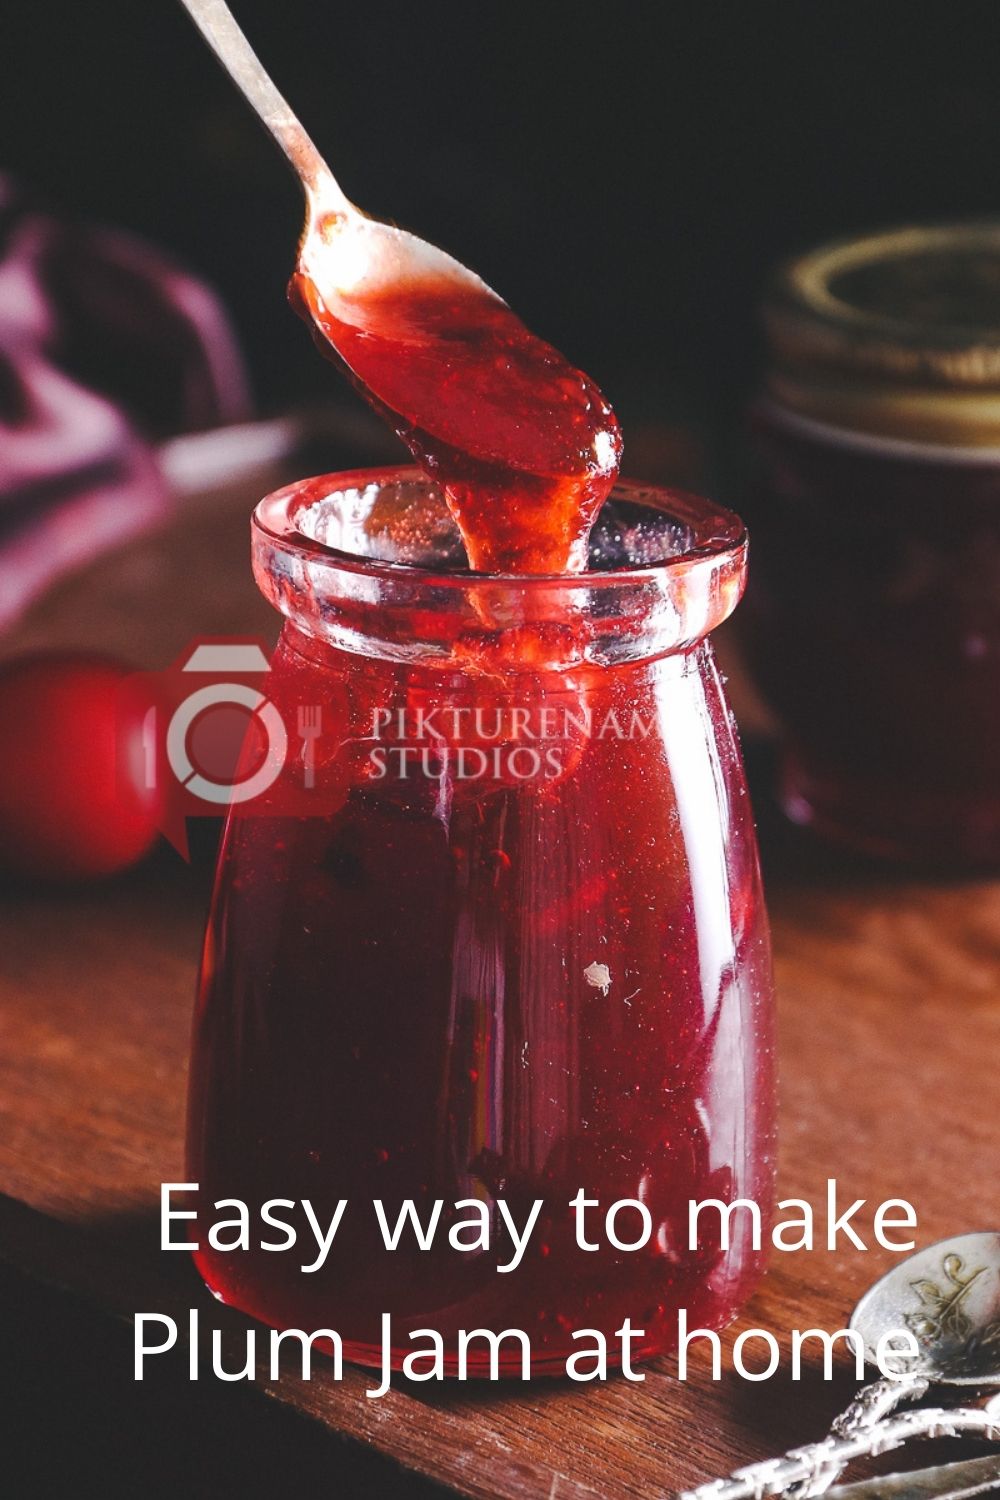 Easyway to make Plum Jam at home for Pinterest - 2 